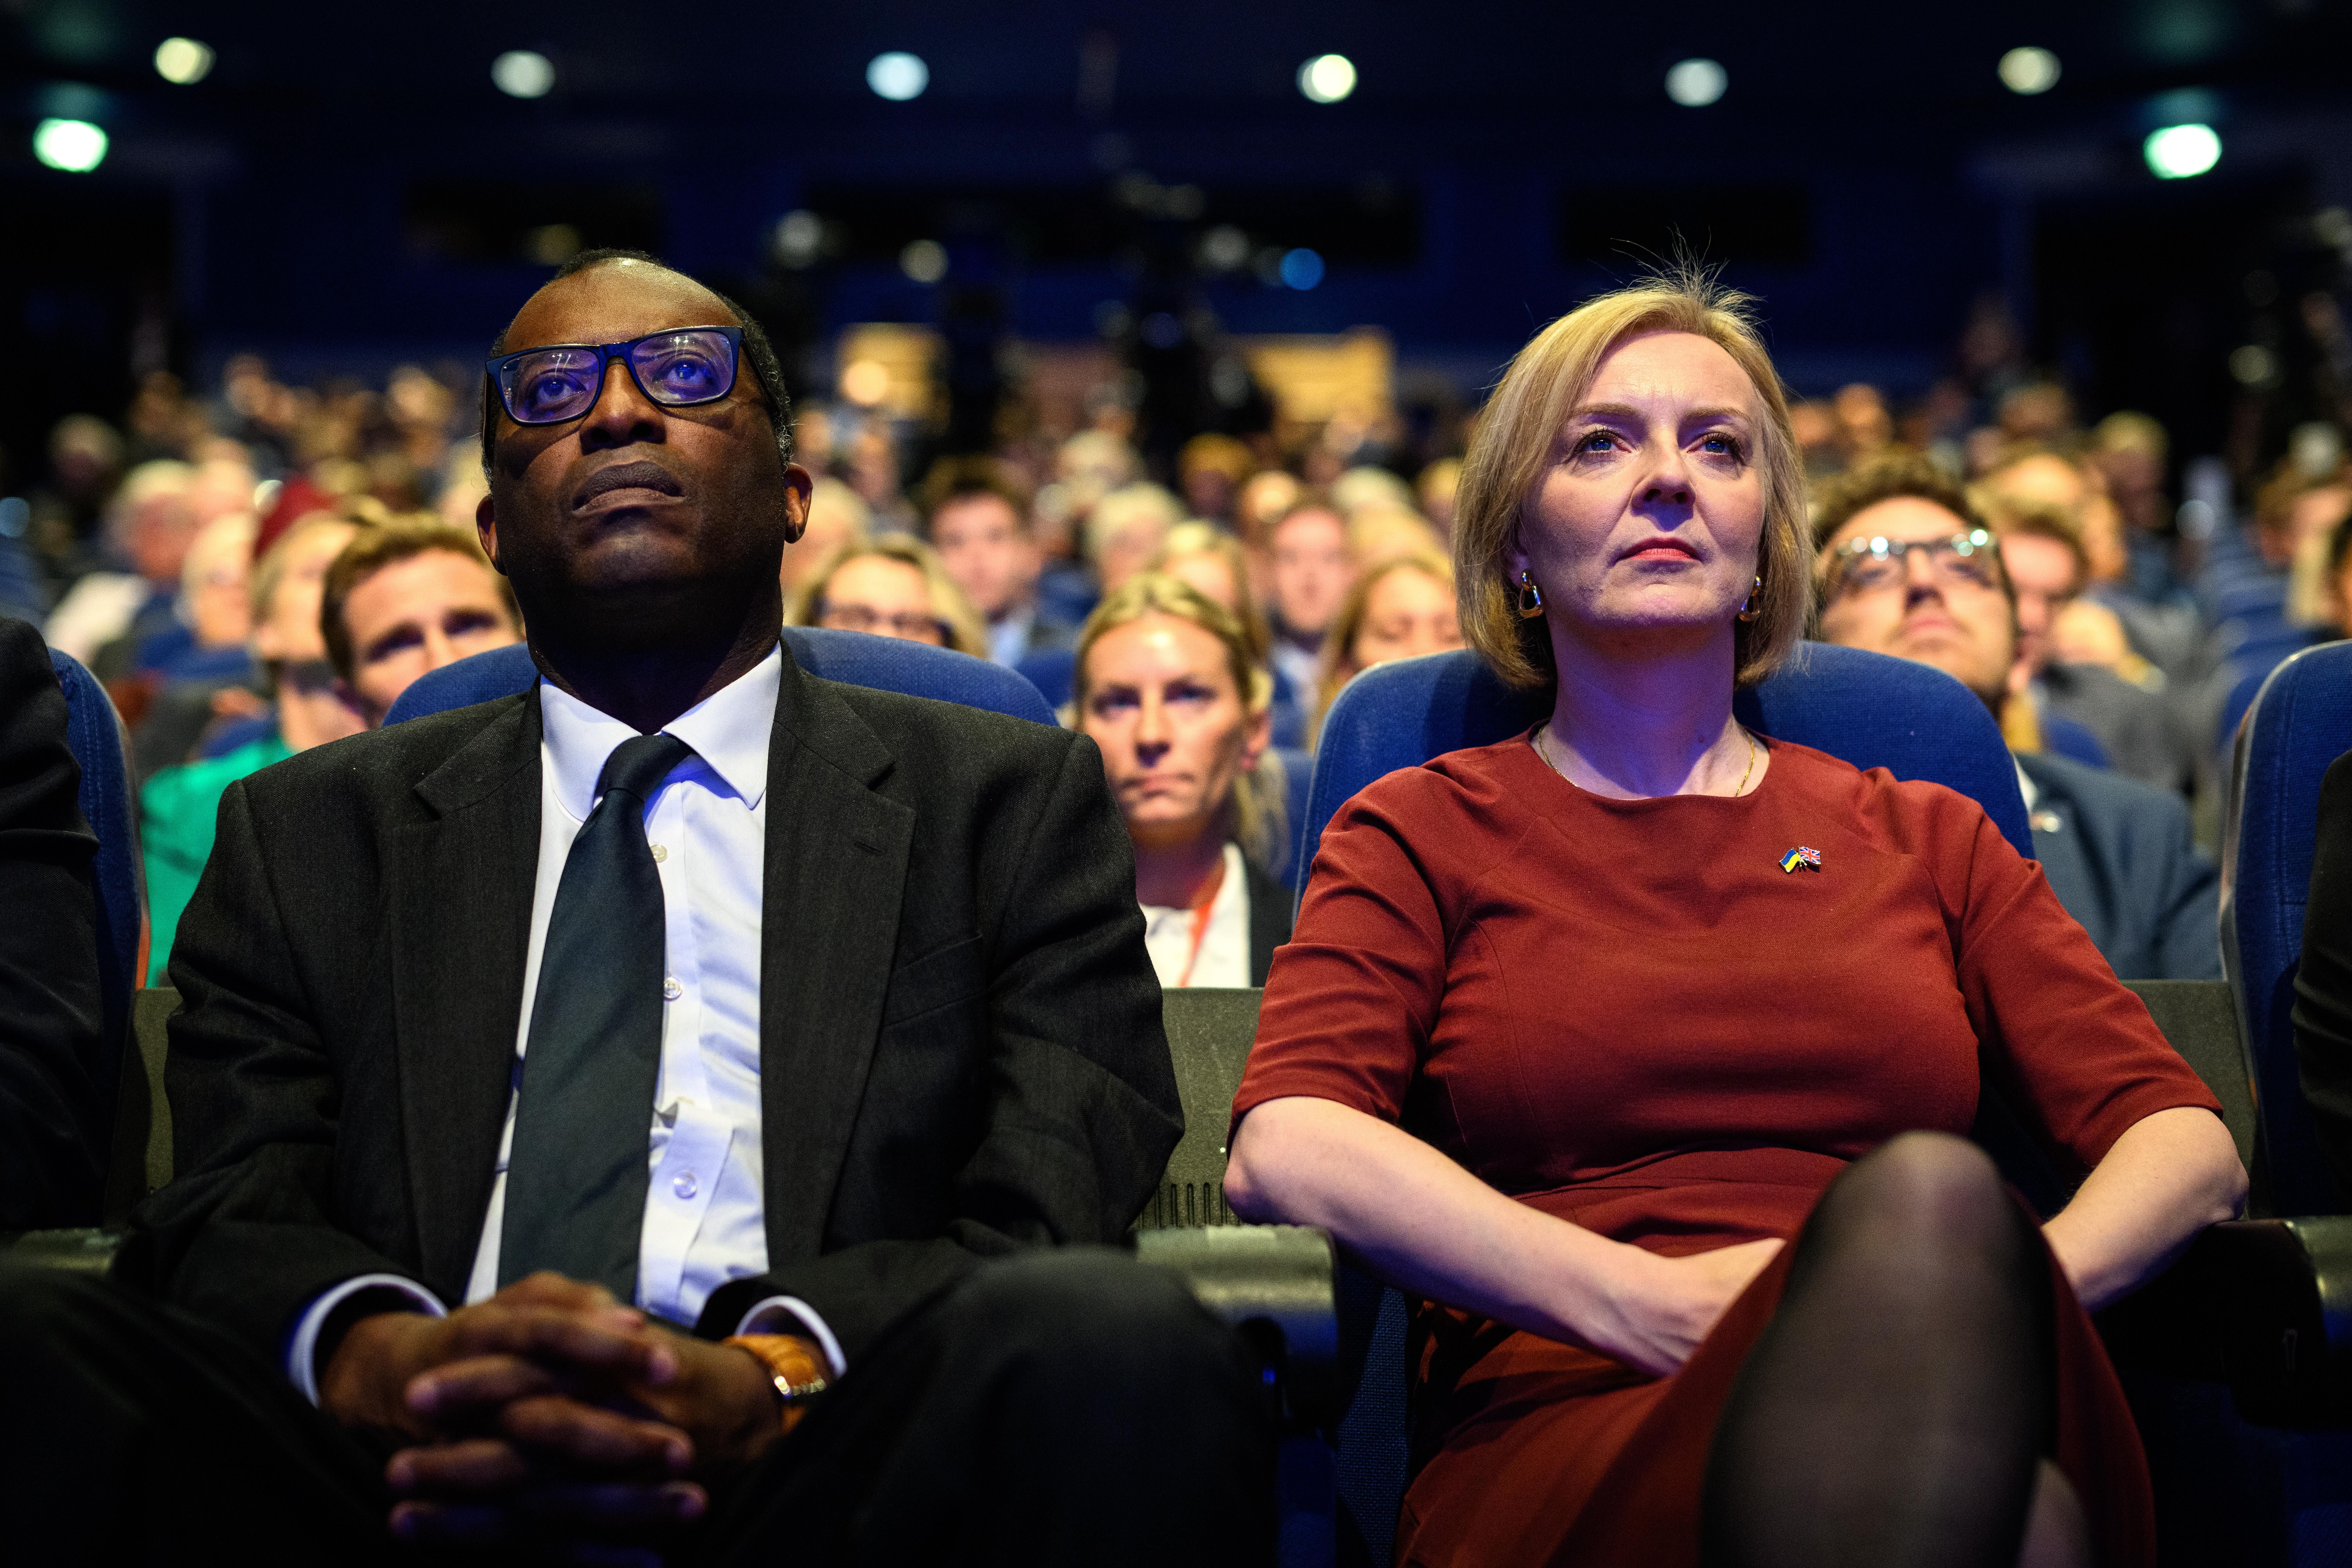 British Prime Minister Liz Truss and Chancellor of the Exchequer Kwasi Kwarteng attend the annual Conservative Party conference on October 2, 2022 in Birmingham, England.